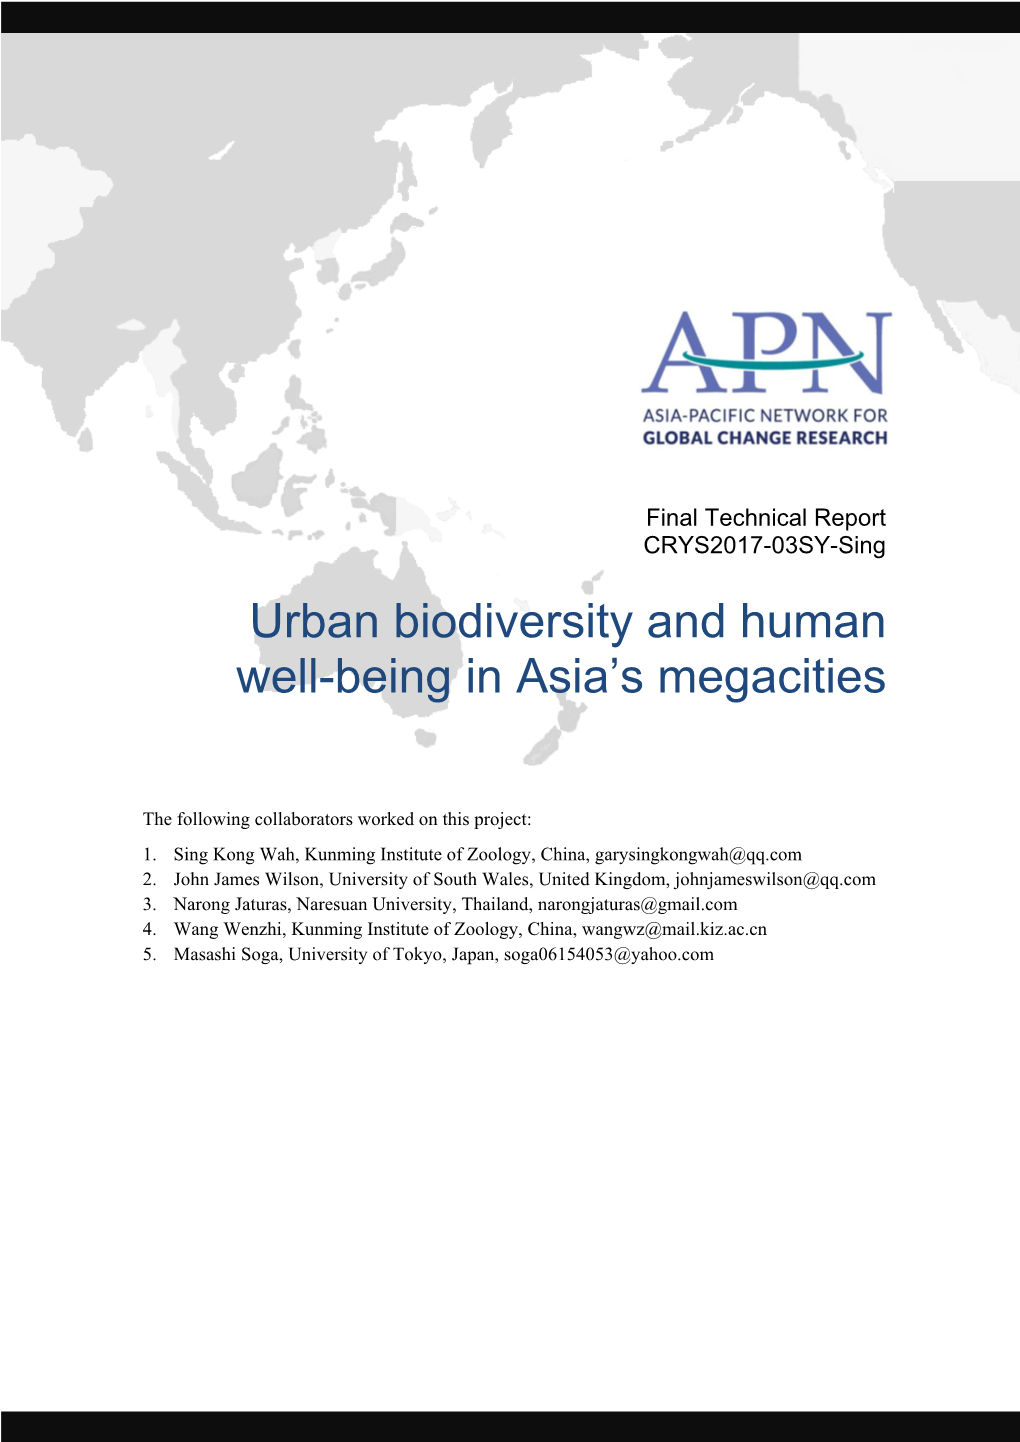 Urban Biodiversity and Human Well-Being in Asia's Megacities